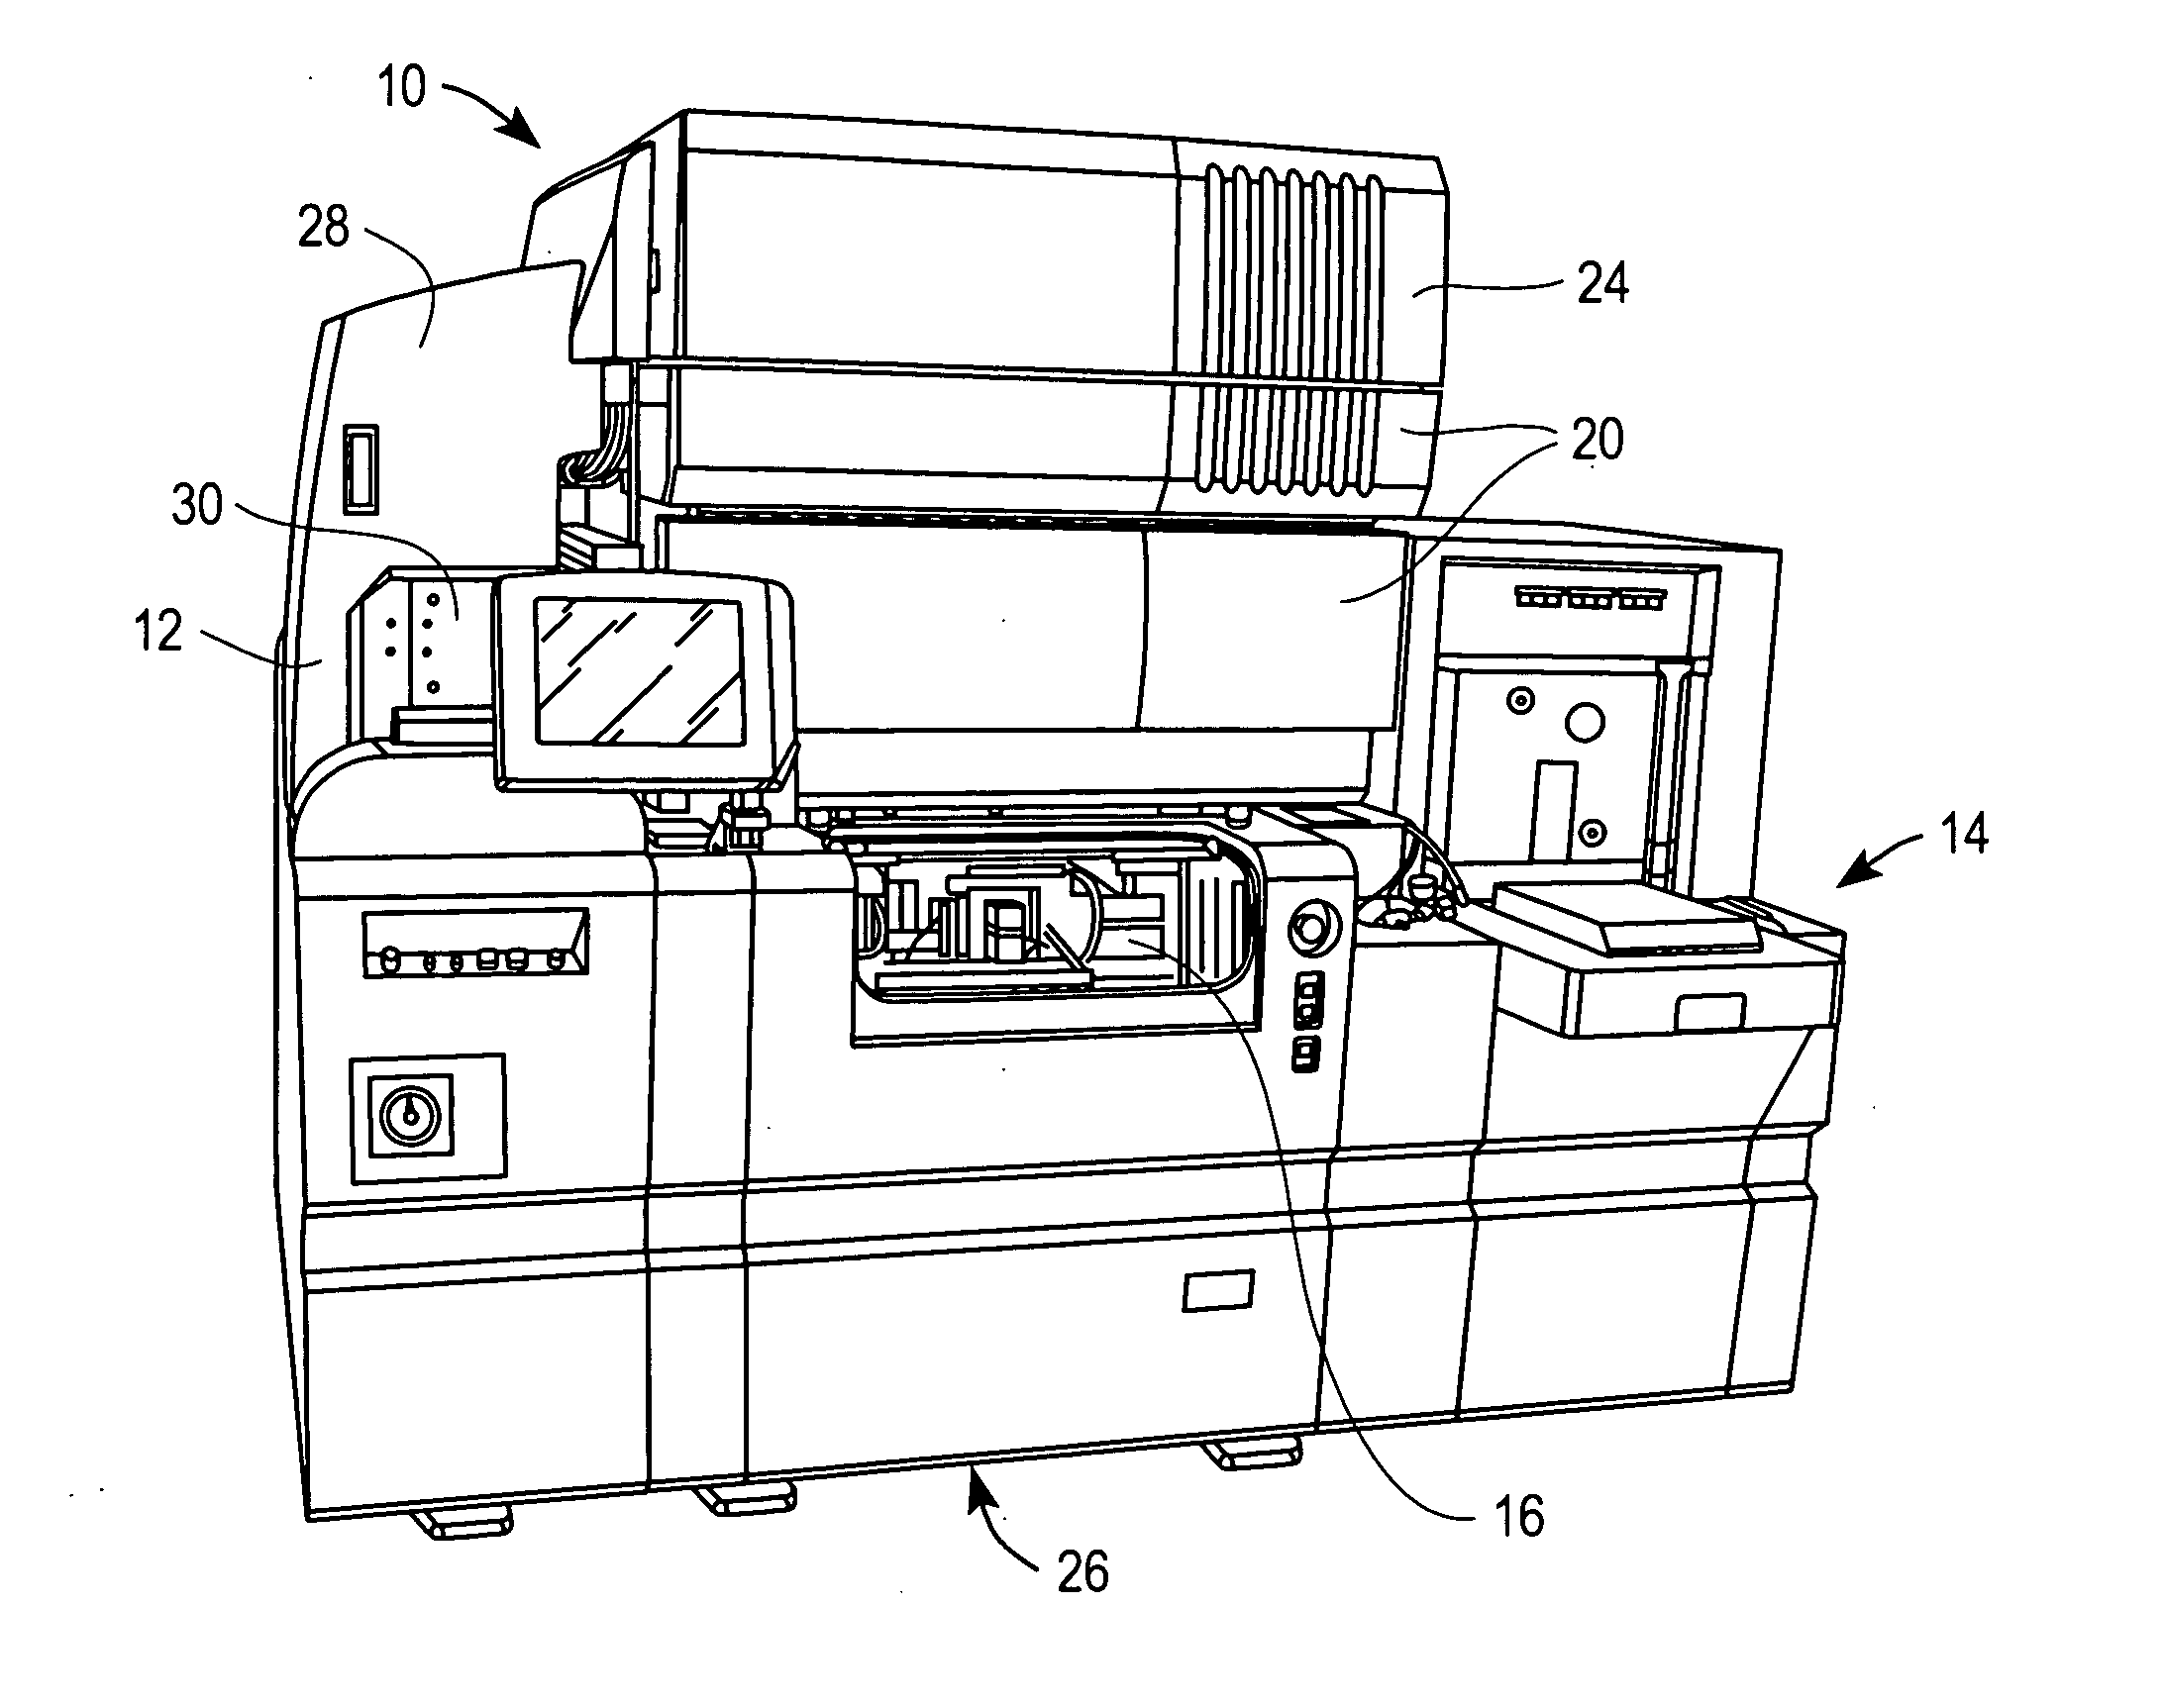 Apparatus for testing electronic devices